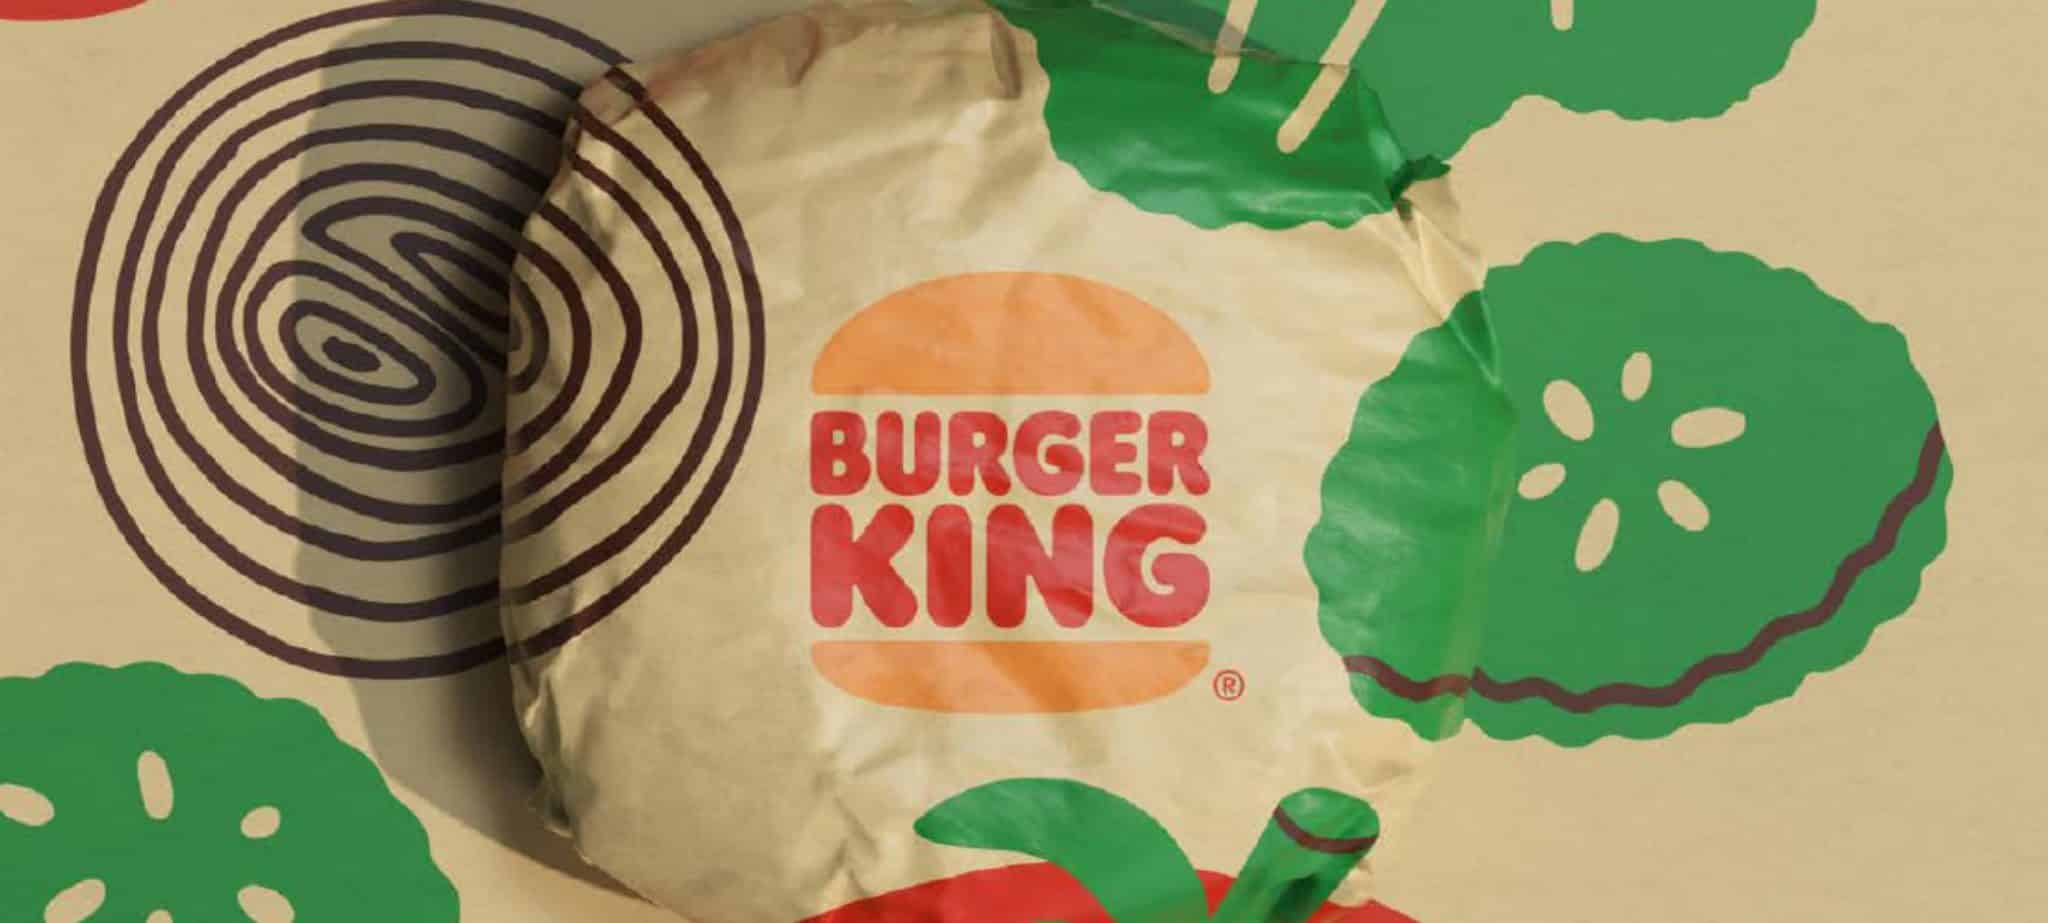 Burger king burger on top of table